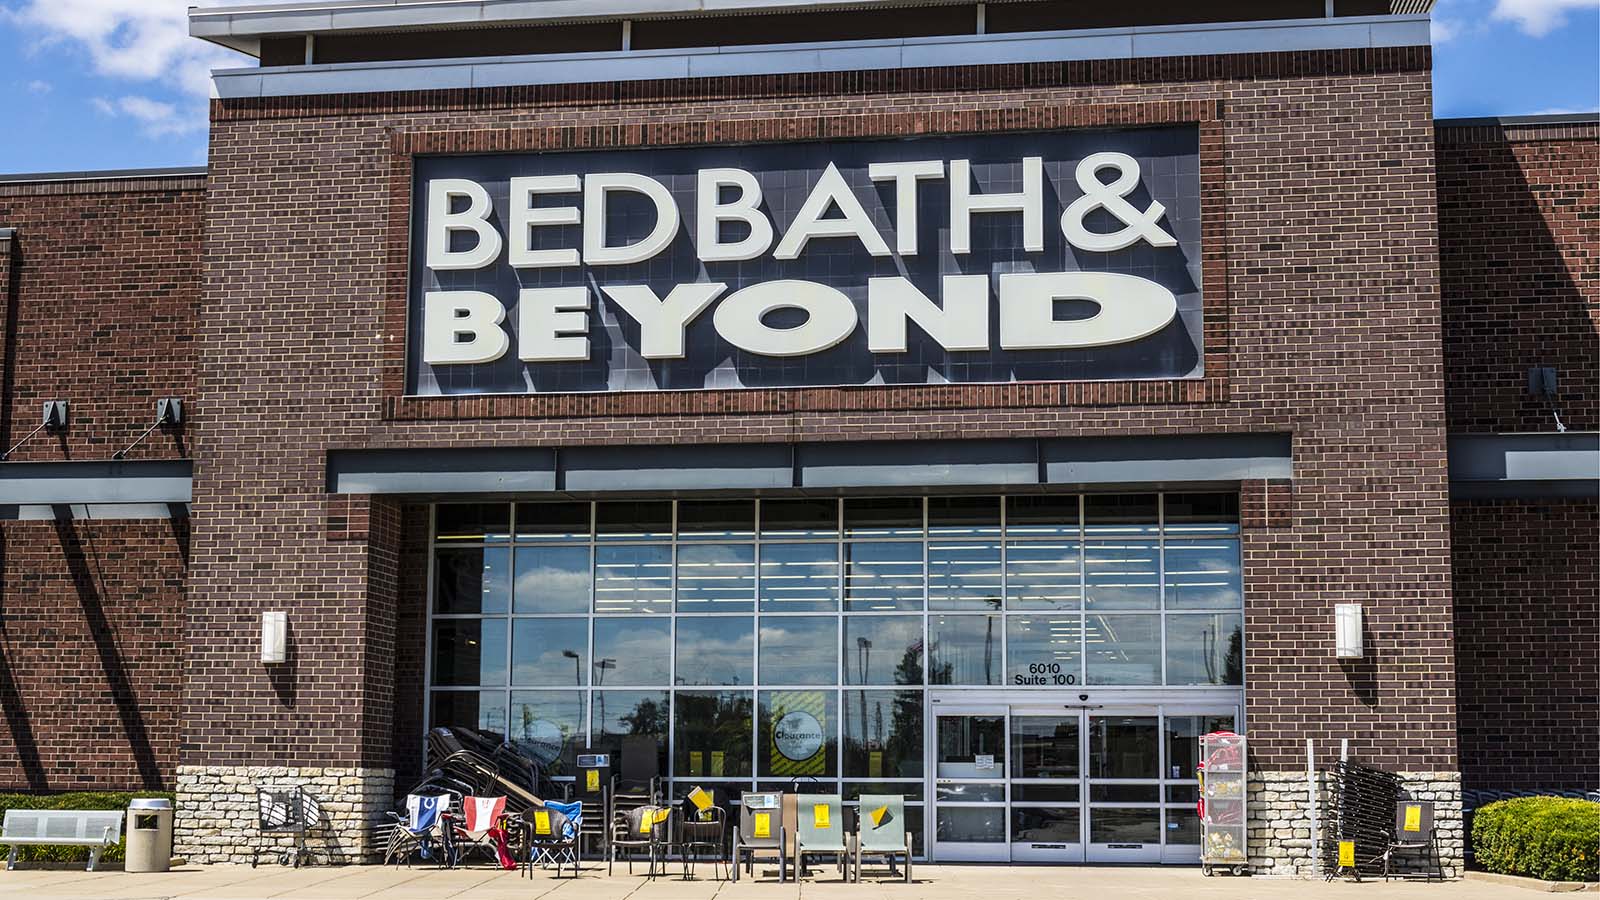 The front view of a Bed Bath & Beyond (BBBY stock) retail location in Indianapolis, Indiana.